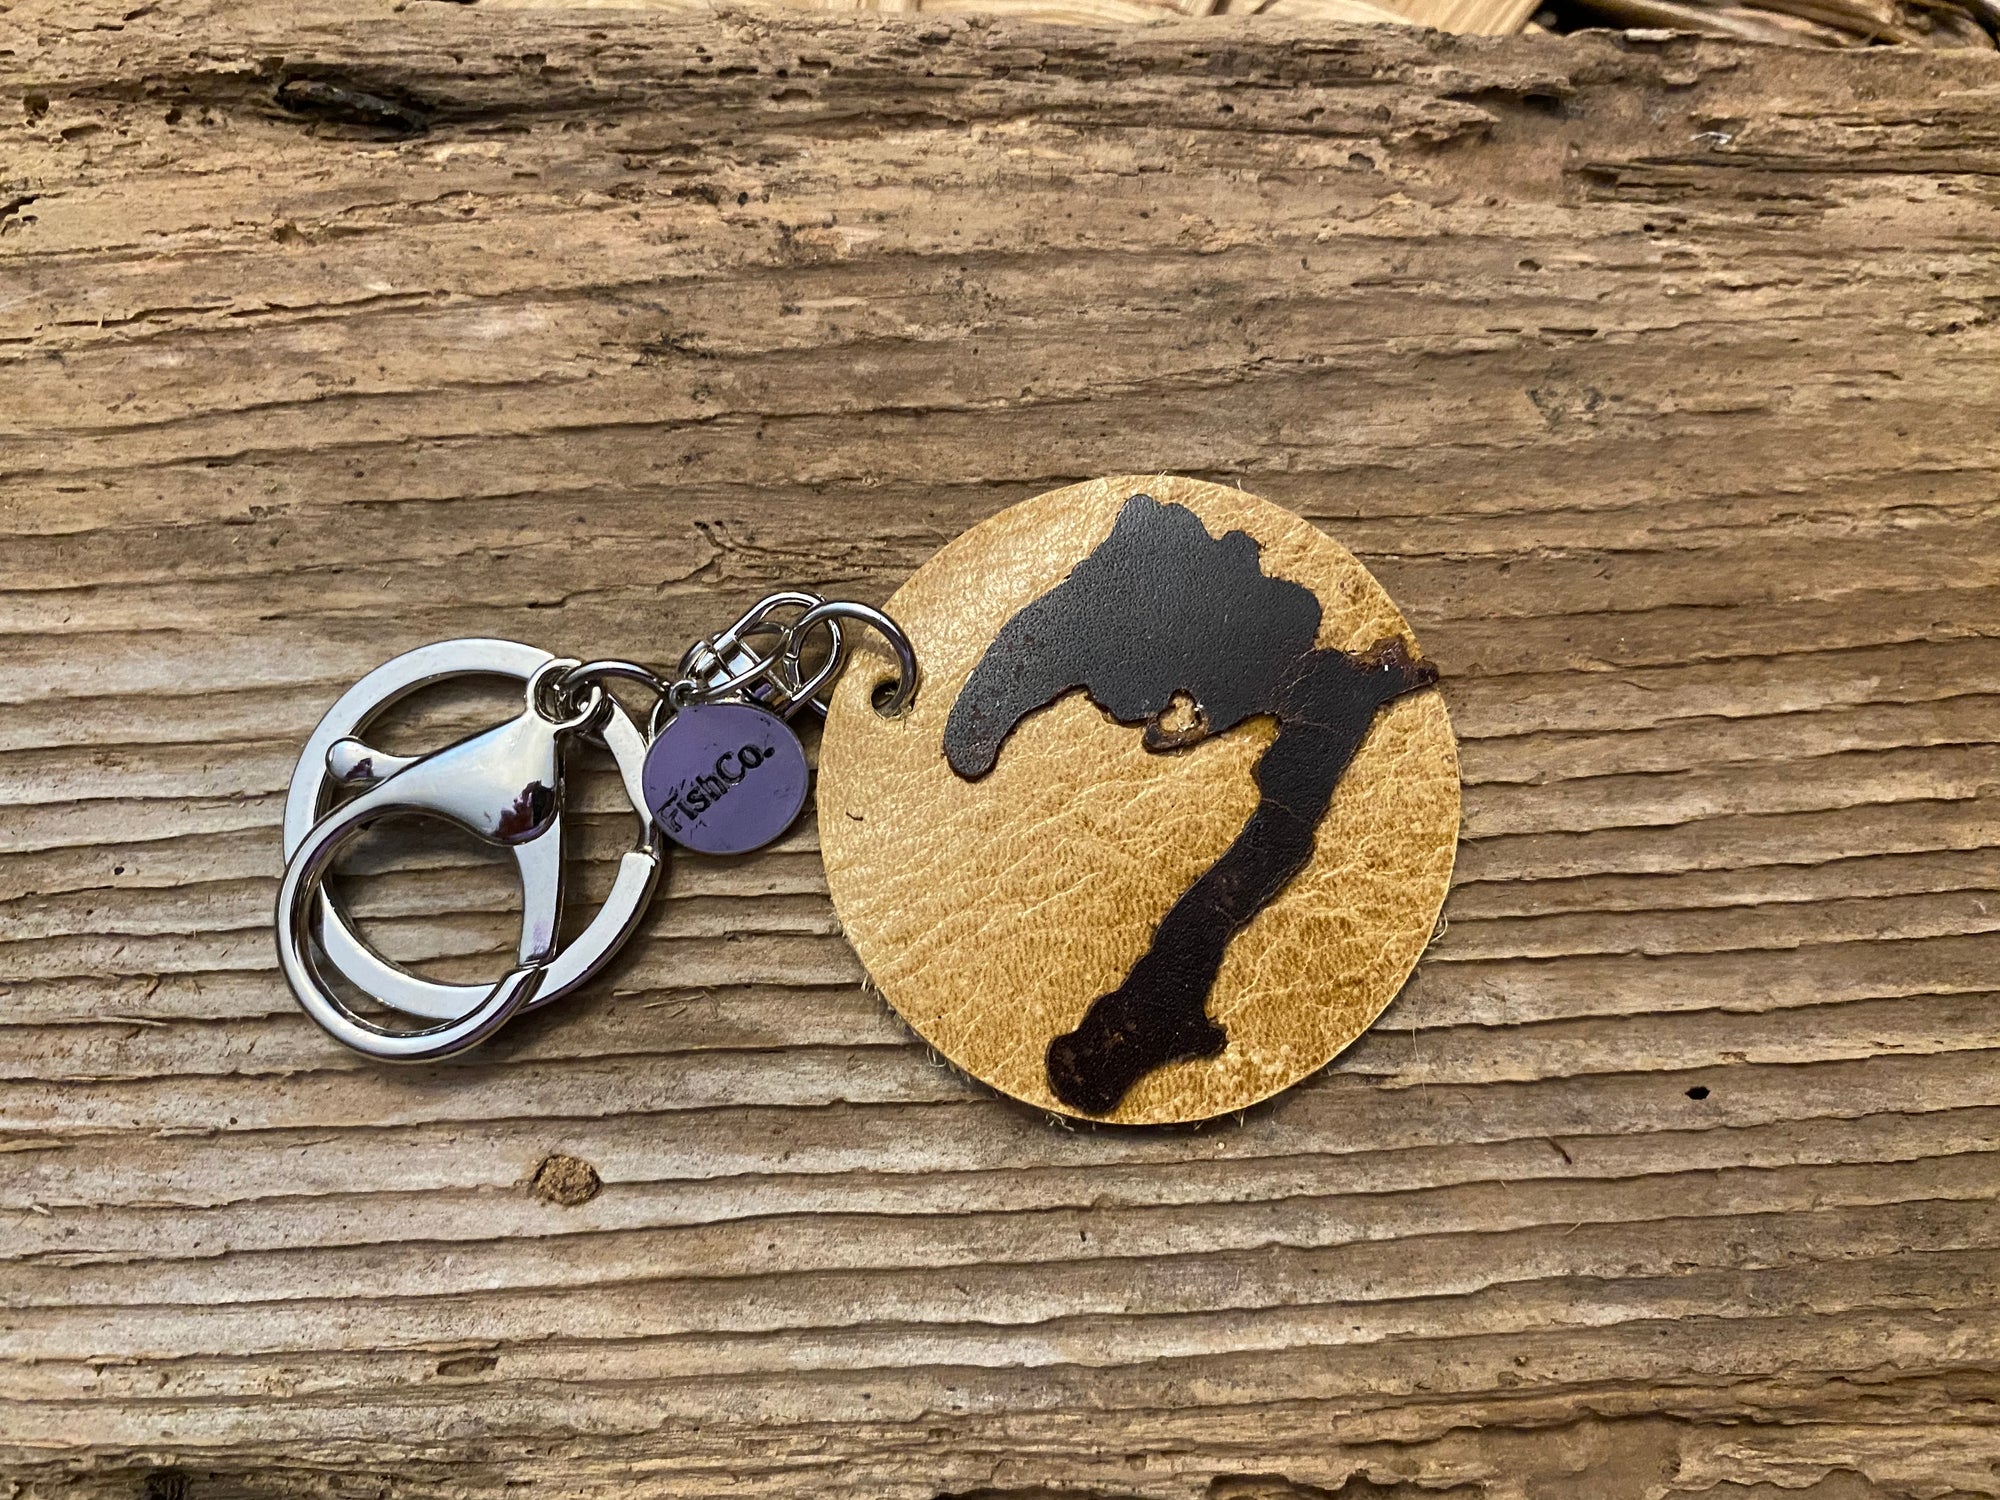 Kwi Keychain featuring hickory on buff leather with silver or gold metal attachments